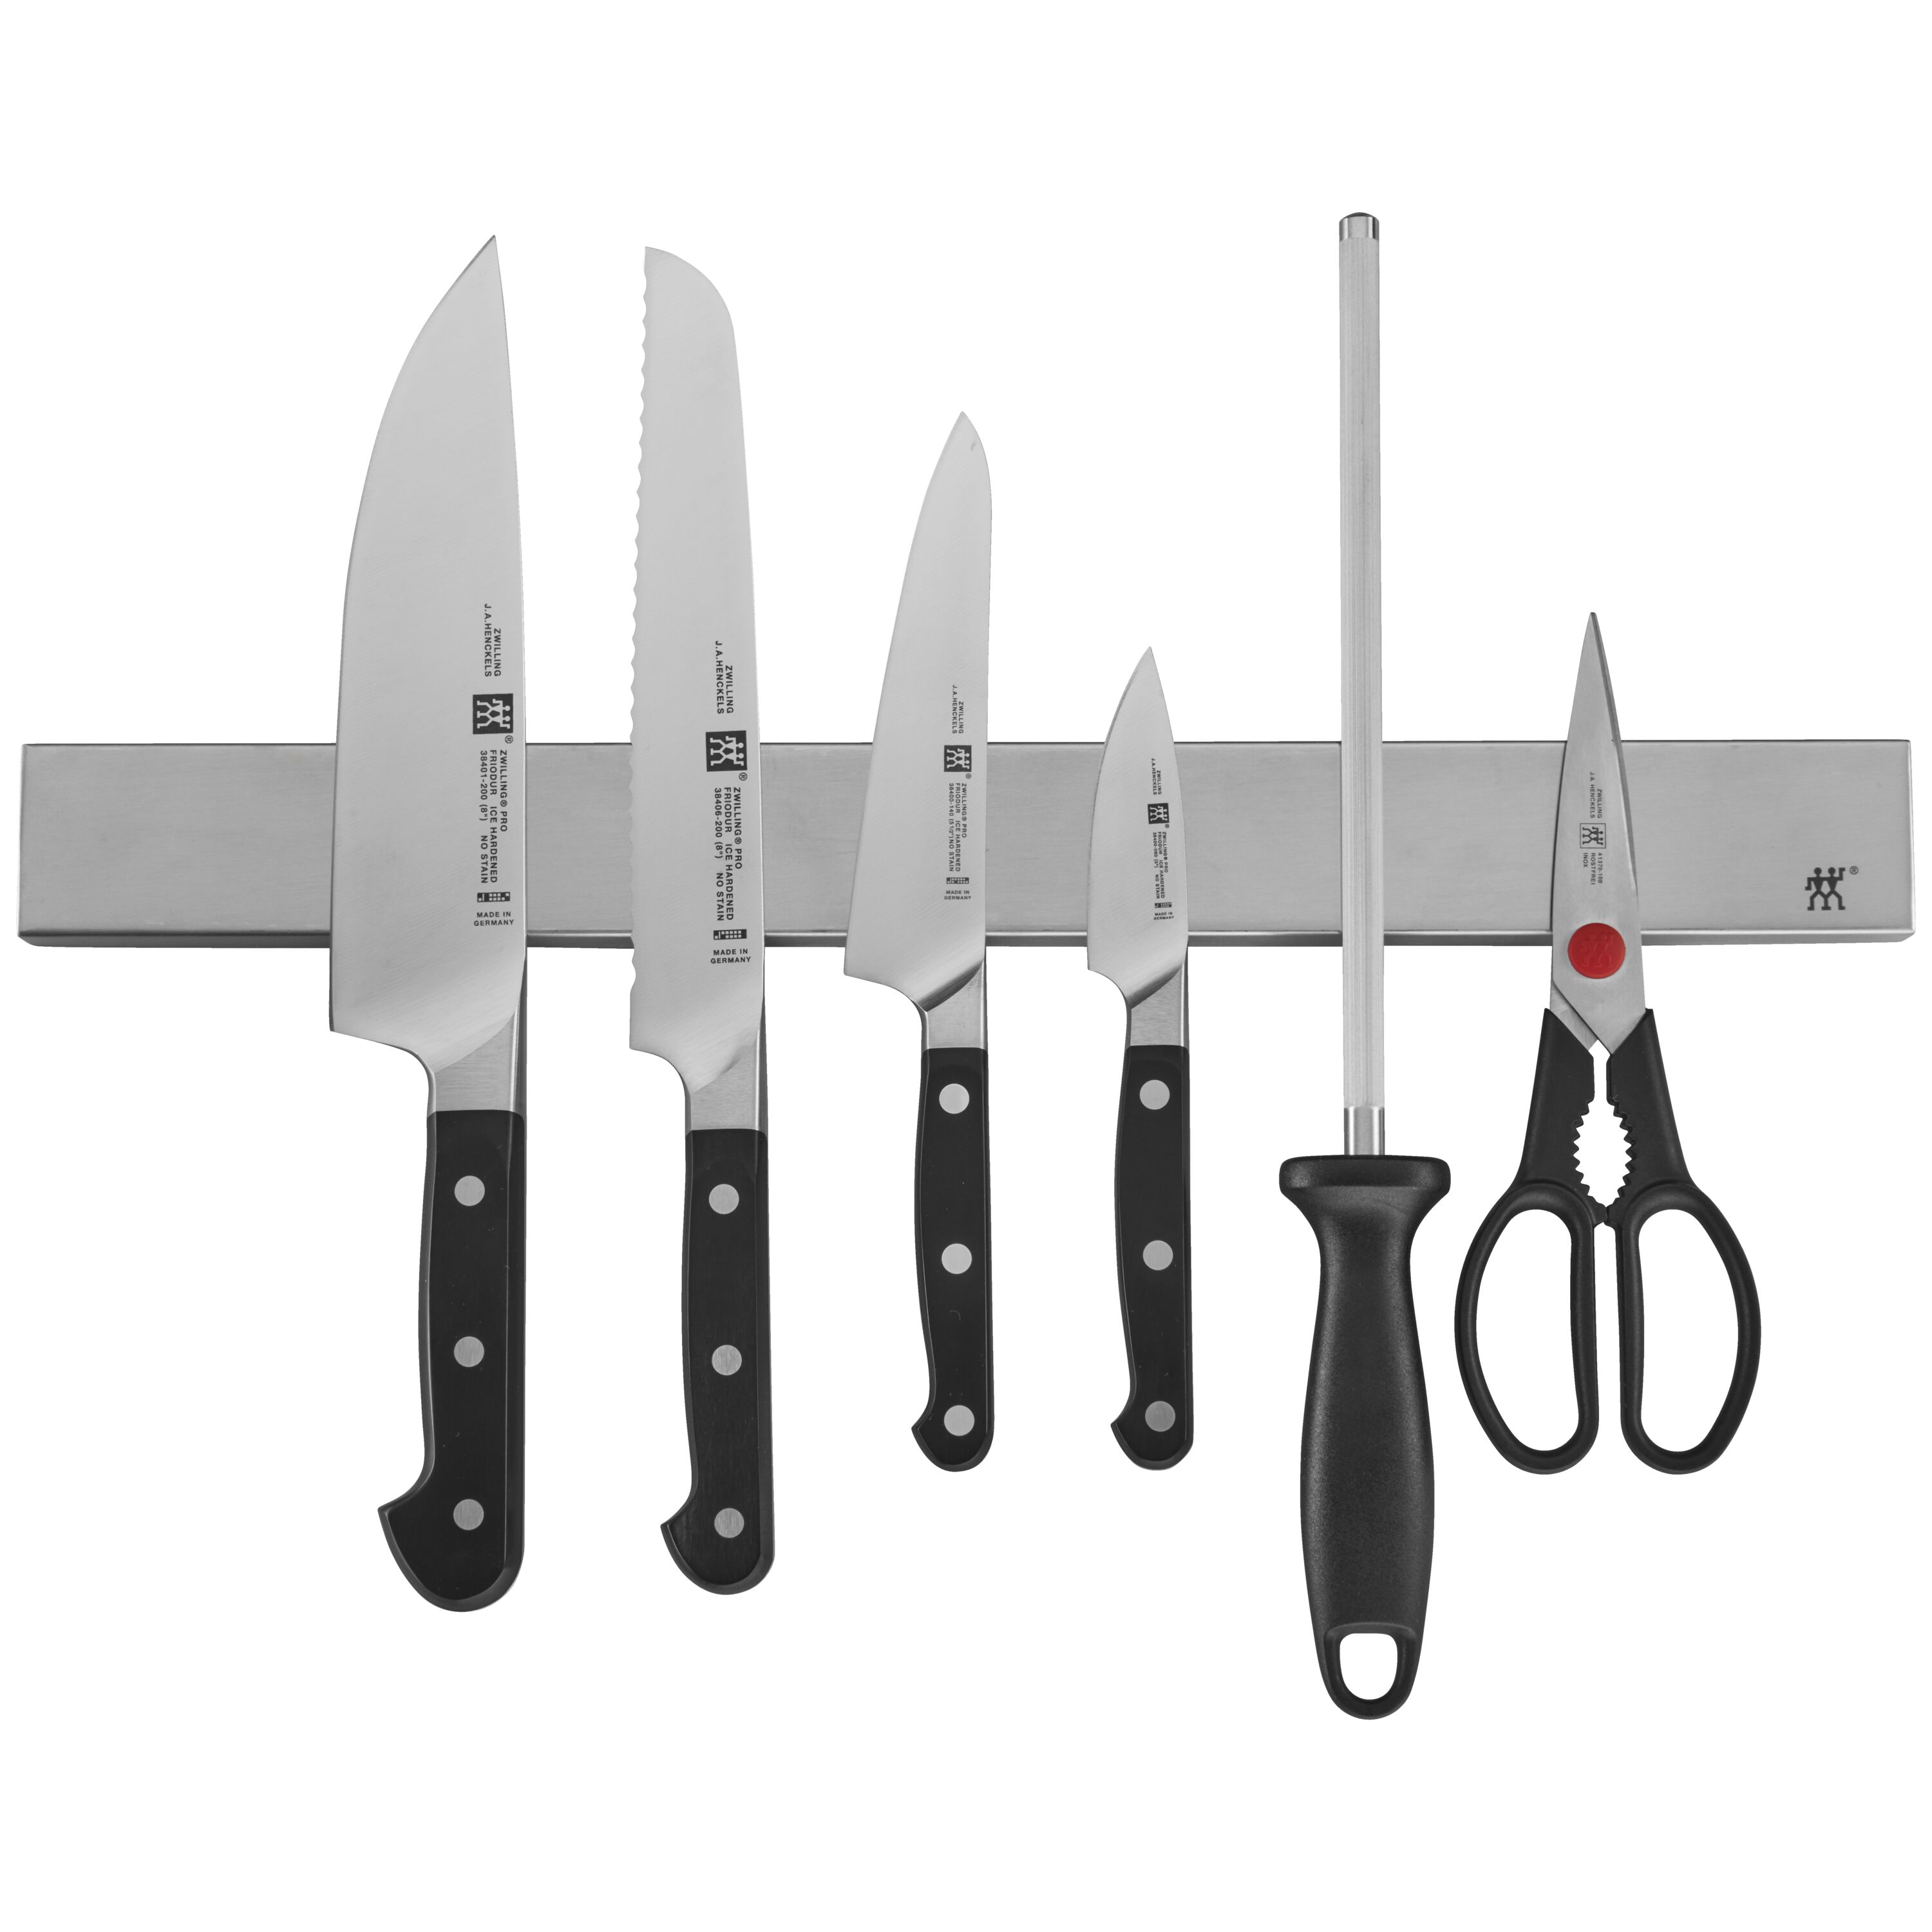 https://www.zwilling.com/on/demandware.static/-/Sites-zwilling-master-catalog/default/dw06abfd6a/images/large/38431-007_1.jpg